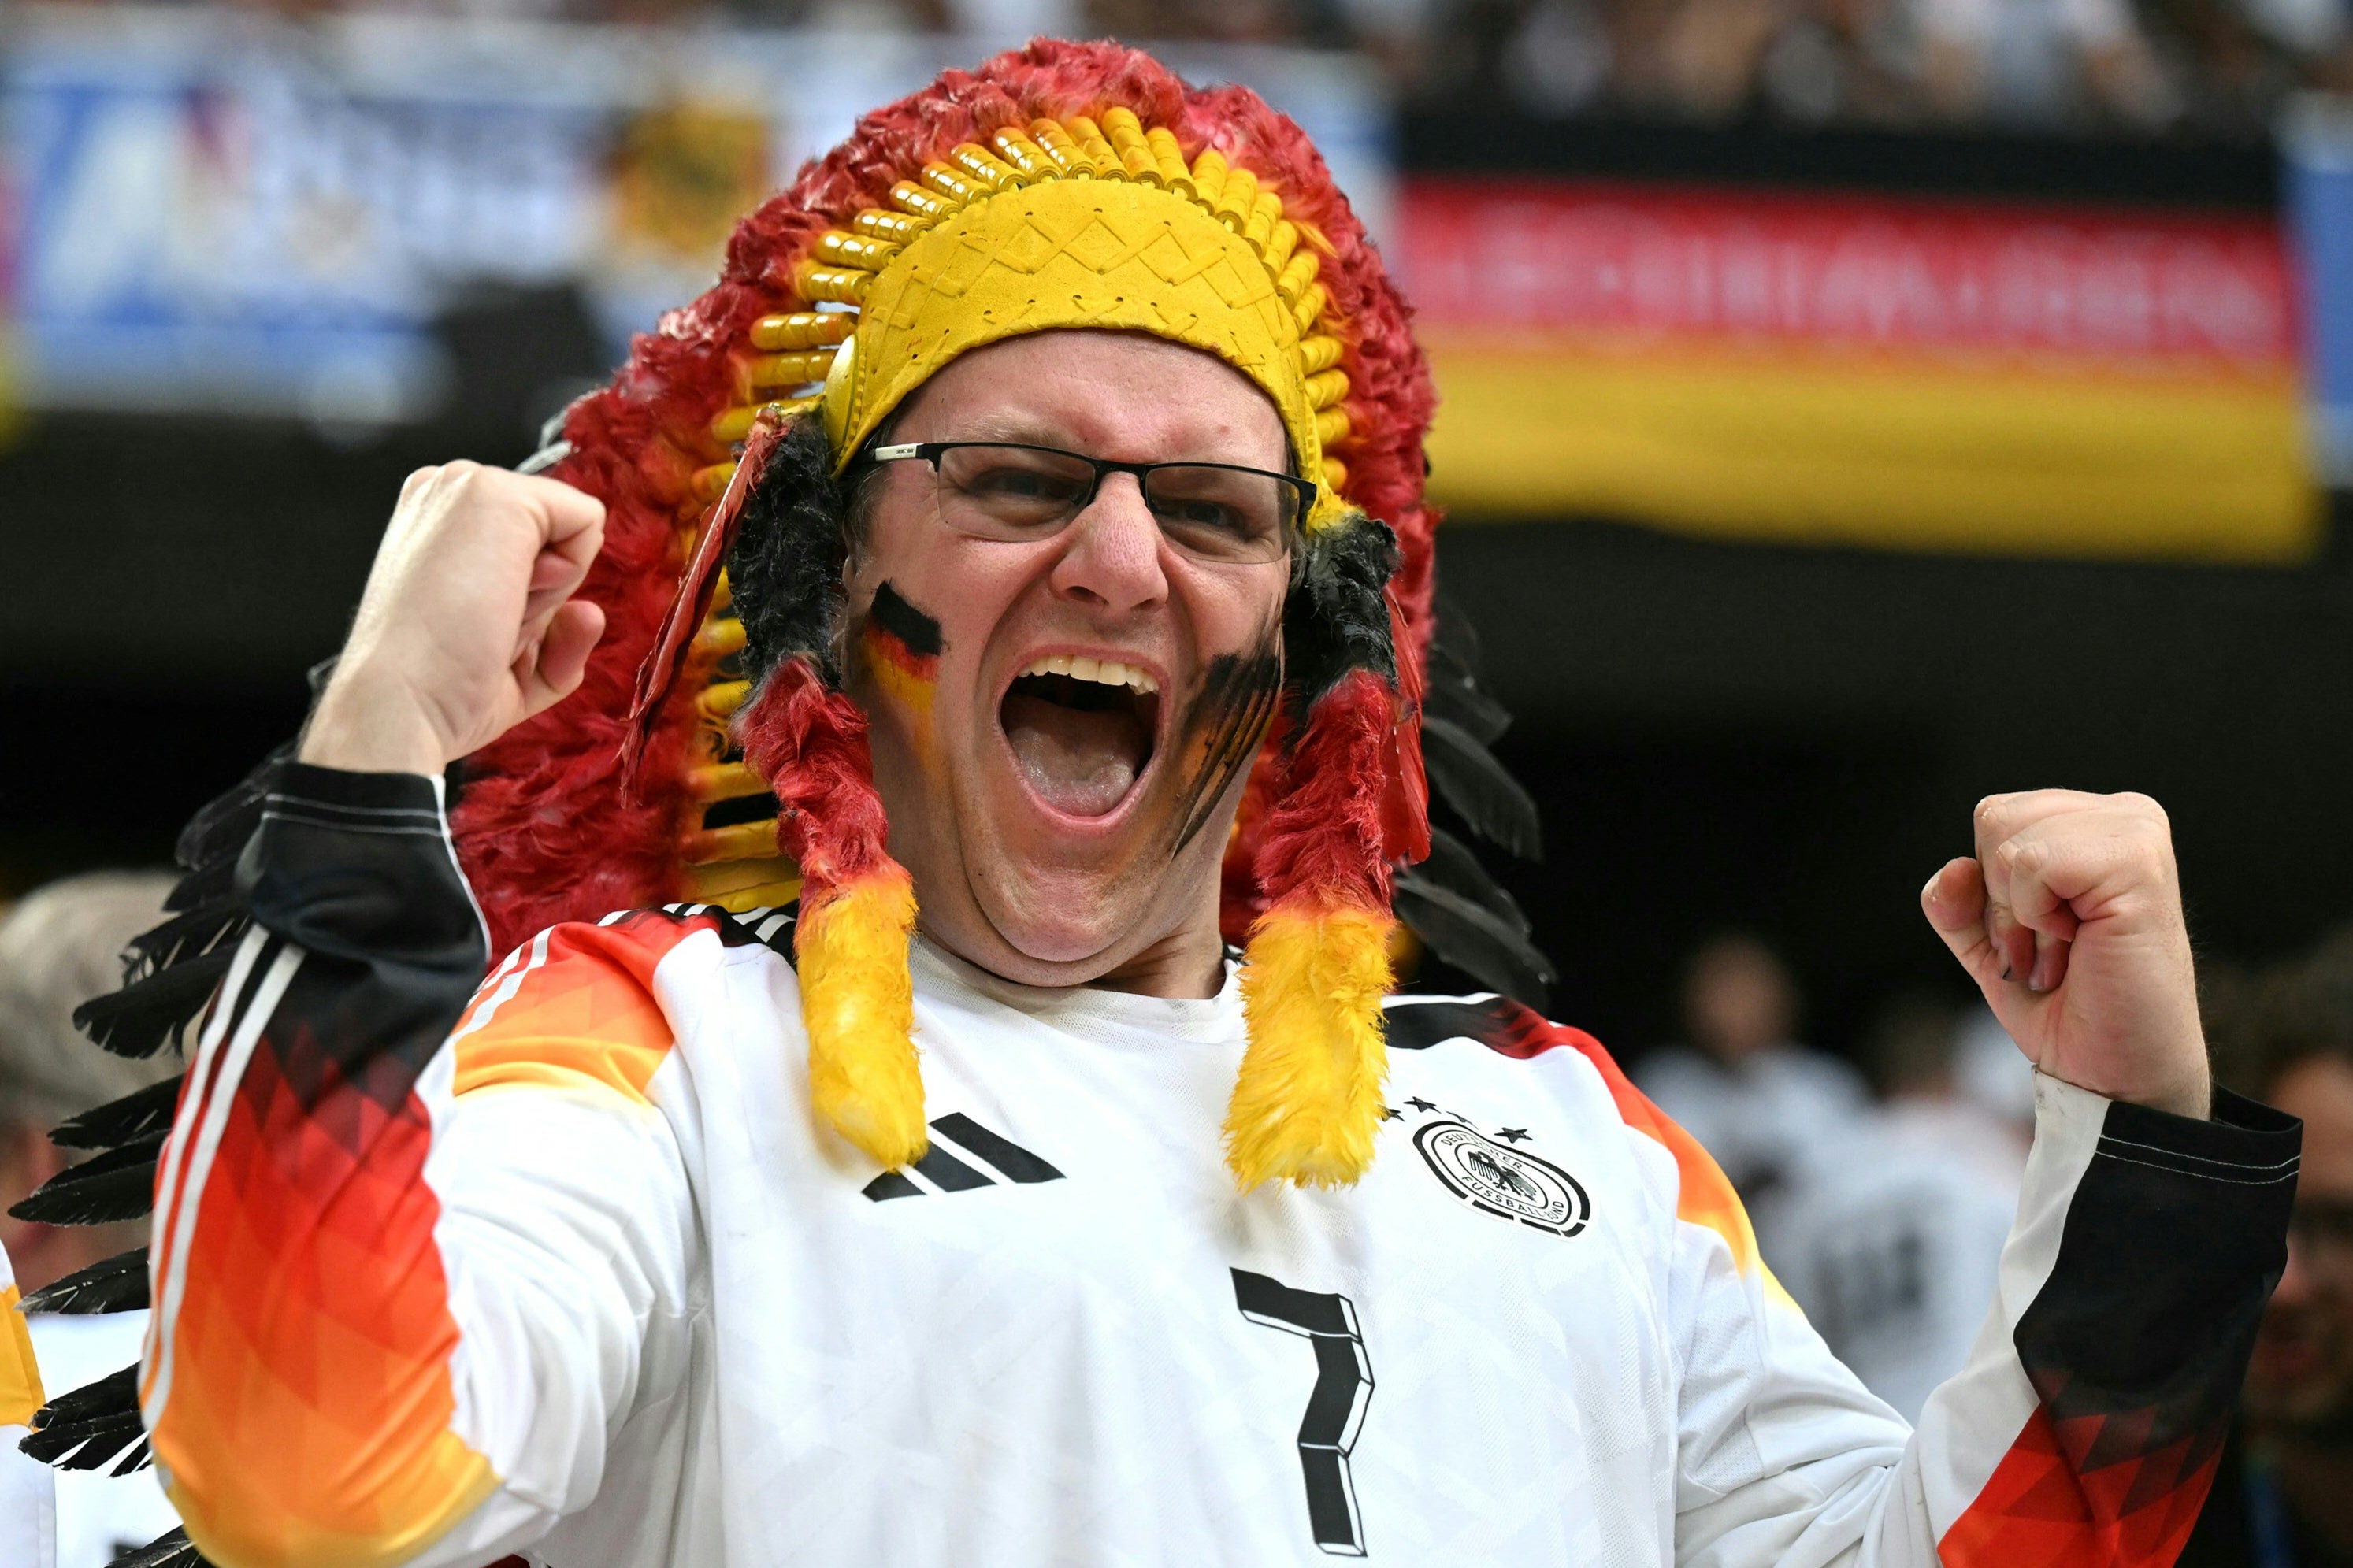 A Germany fan gears up for their last-16 tie with Denmark